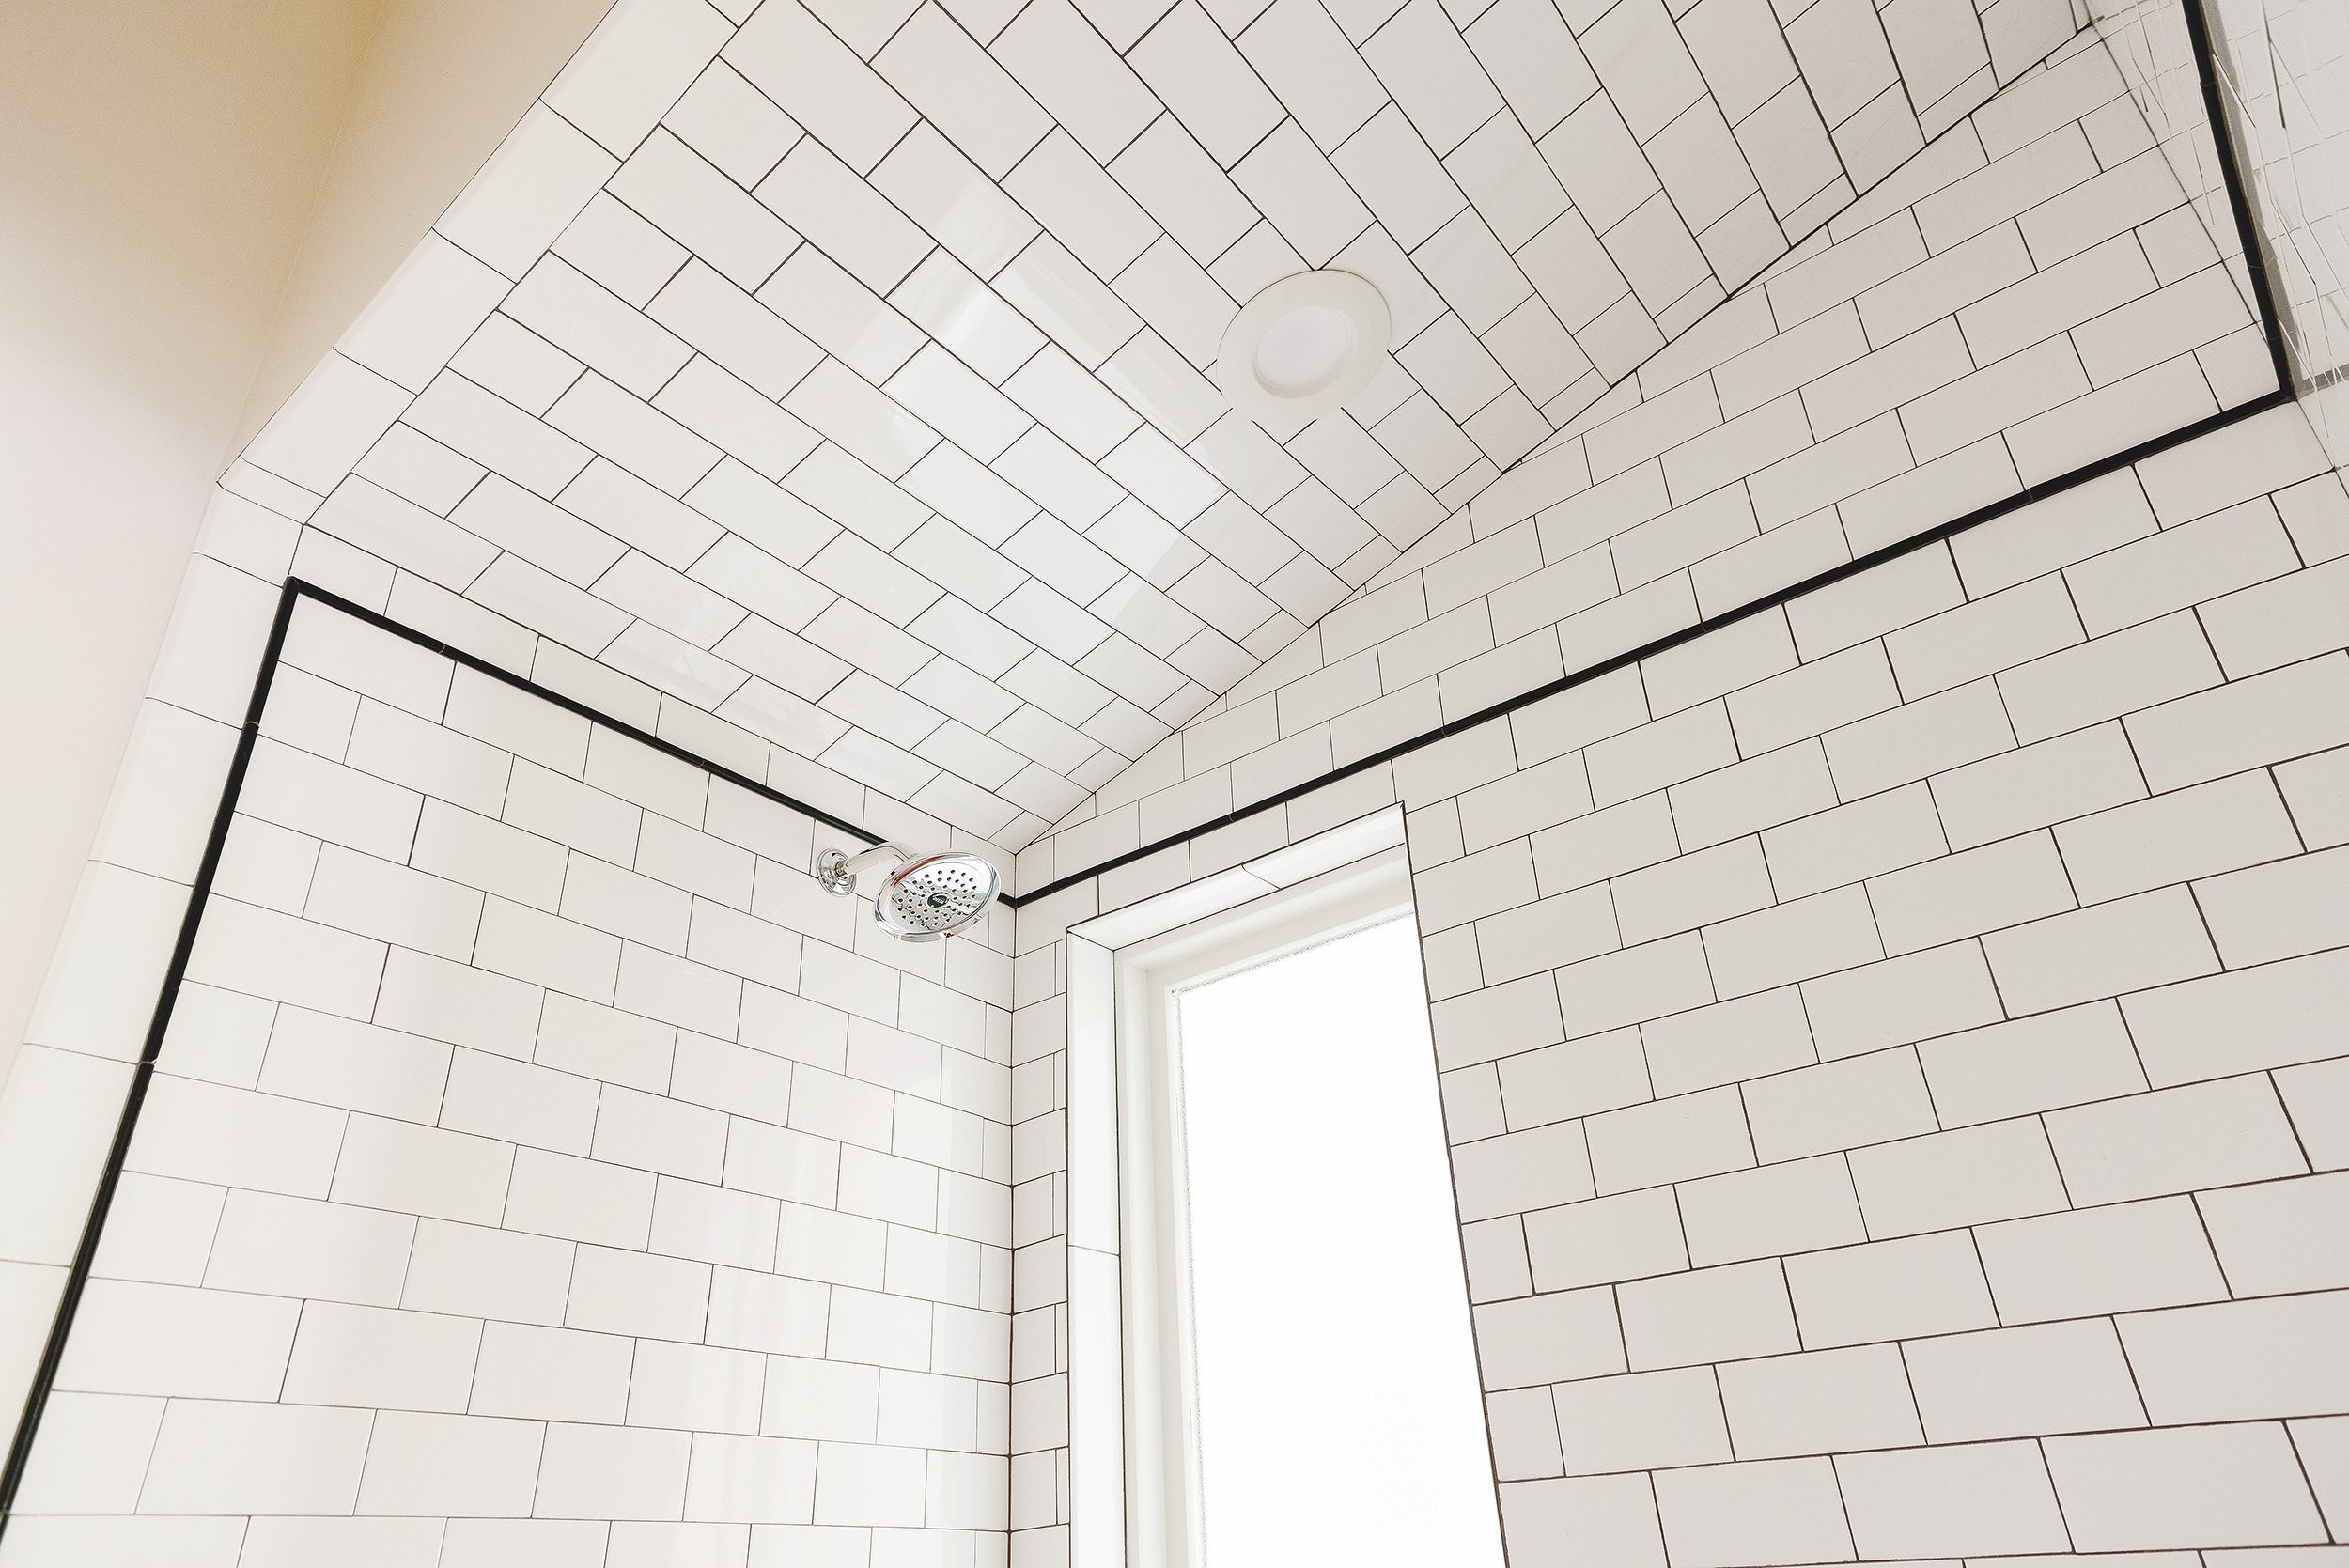 detail of tiling a sloped ceiling with subway tile | via Yellow Brick Home